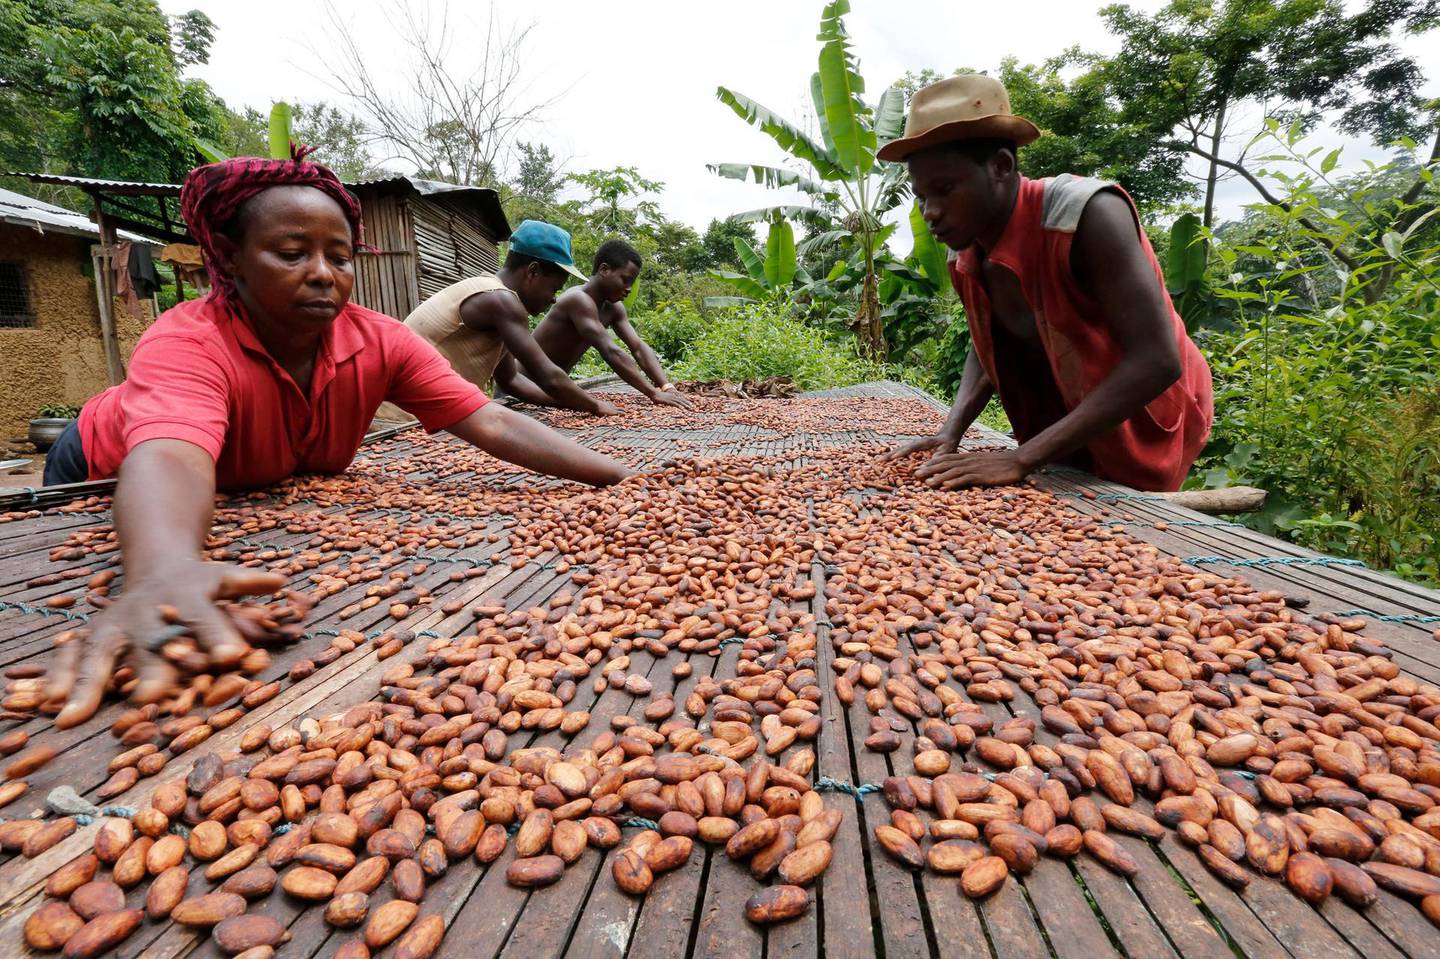 People work with cocoa beans in Enchi June 17, 2014. Picture taken June 17, 2014. To match Insight GHANA-IVORYCOAST/COCOA       REUTERS/Thierry Gouegnon (GHANA - Tags: BUSINESS AGRICULTURE FOOD) - GM1EA7S1P1A01